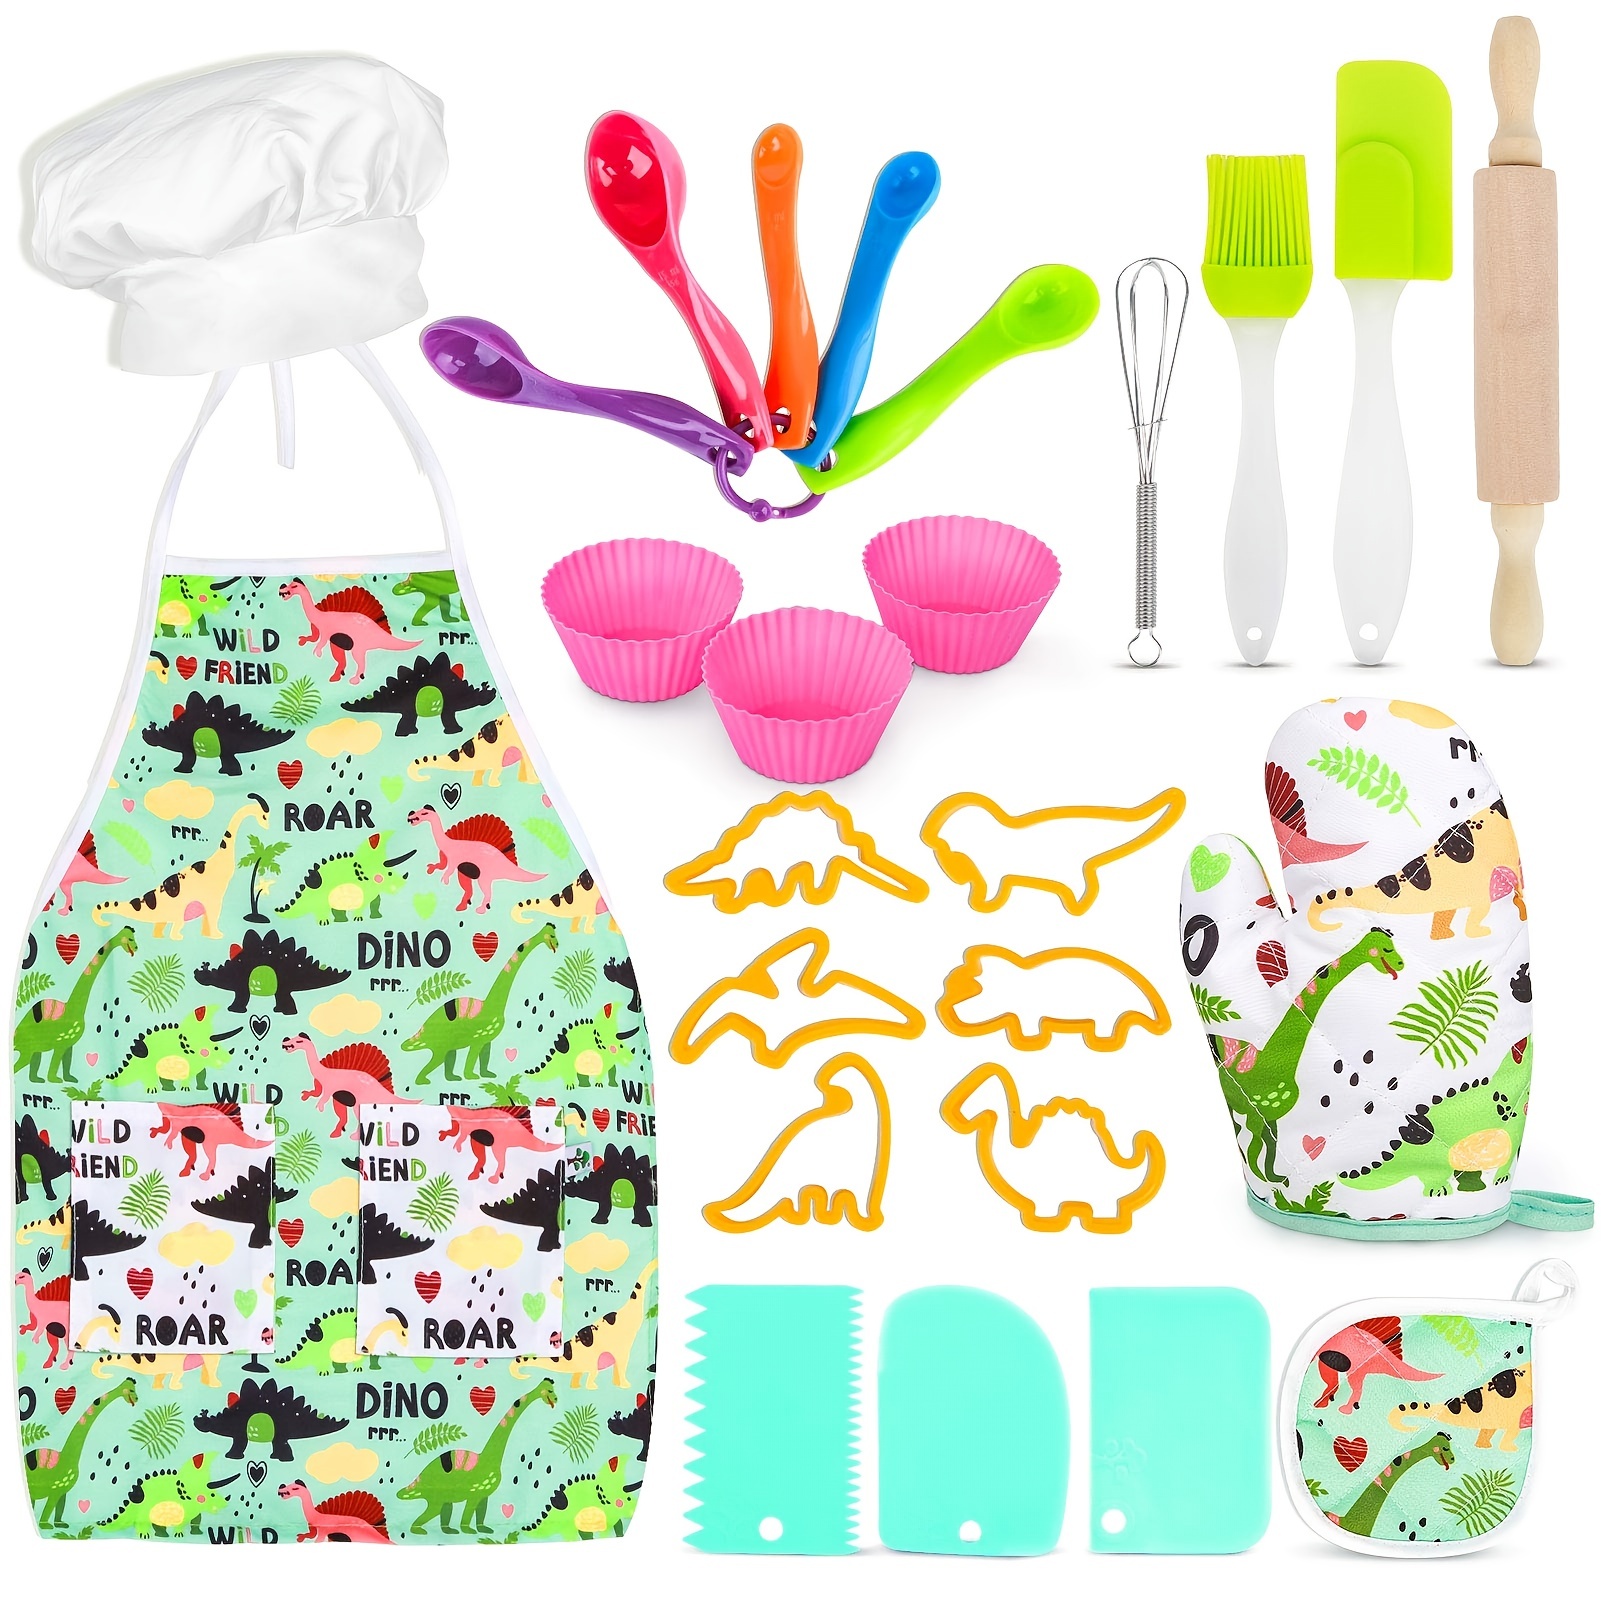 Kids Baking Set Real Cooking Kit Supplies with Kids Apron, Chef Hat, Oven  Mitt, Recipes and Kitchen Accessories Tools for Toddler Dress Up Kids Gift